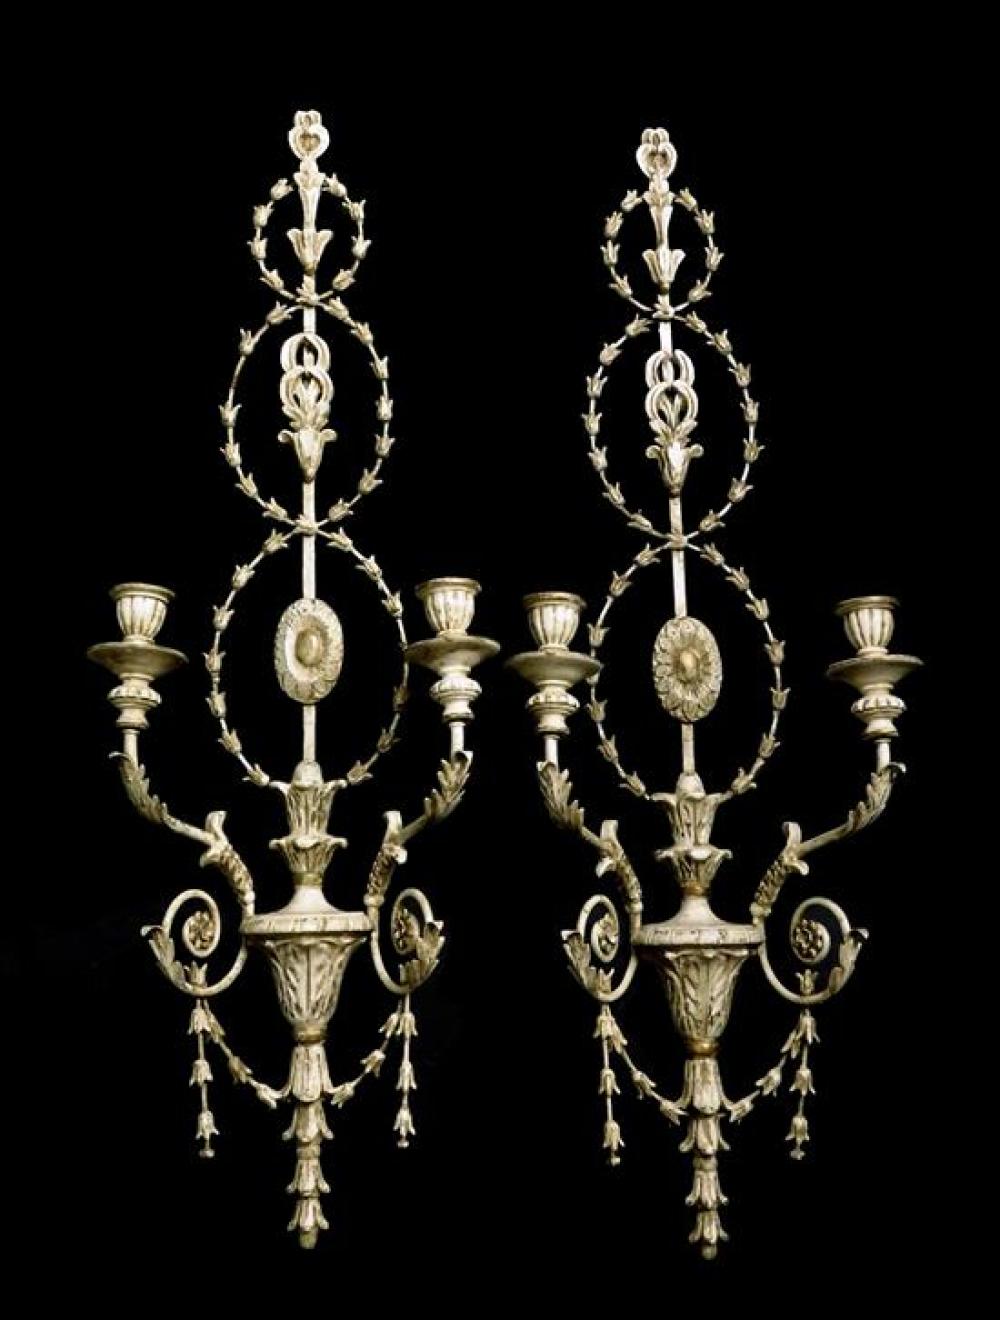 PAIR OF LARGE WOOD AND METAL SCONCES